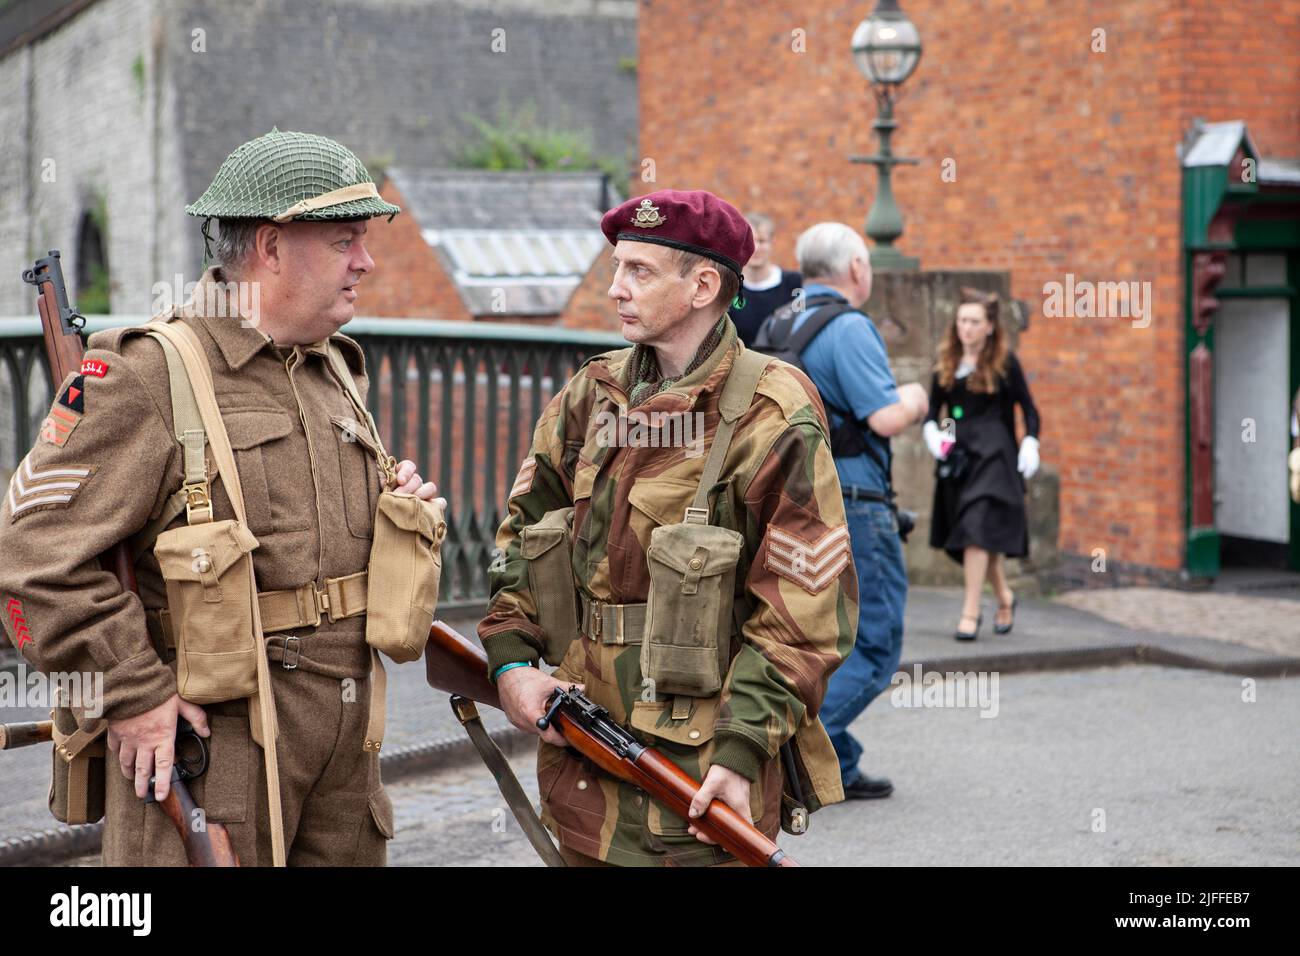 two males Sergent's soldiers in full battle uniform talking, ww2 concept Stock Photo